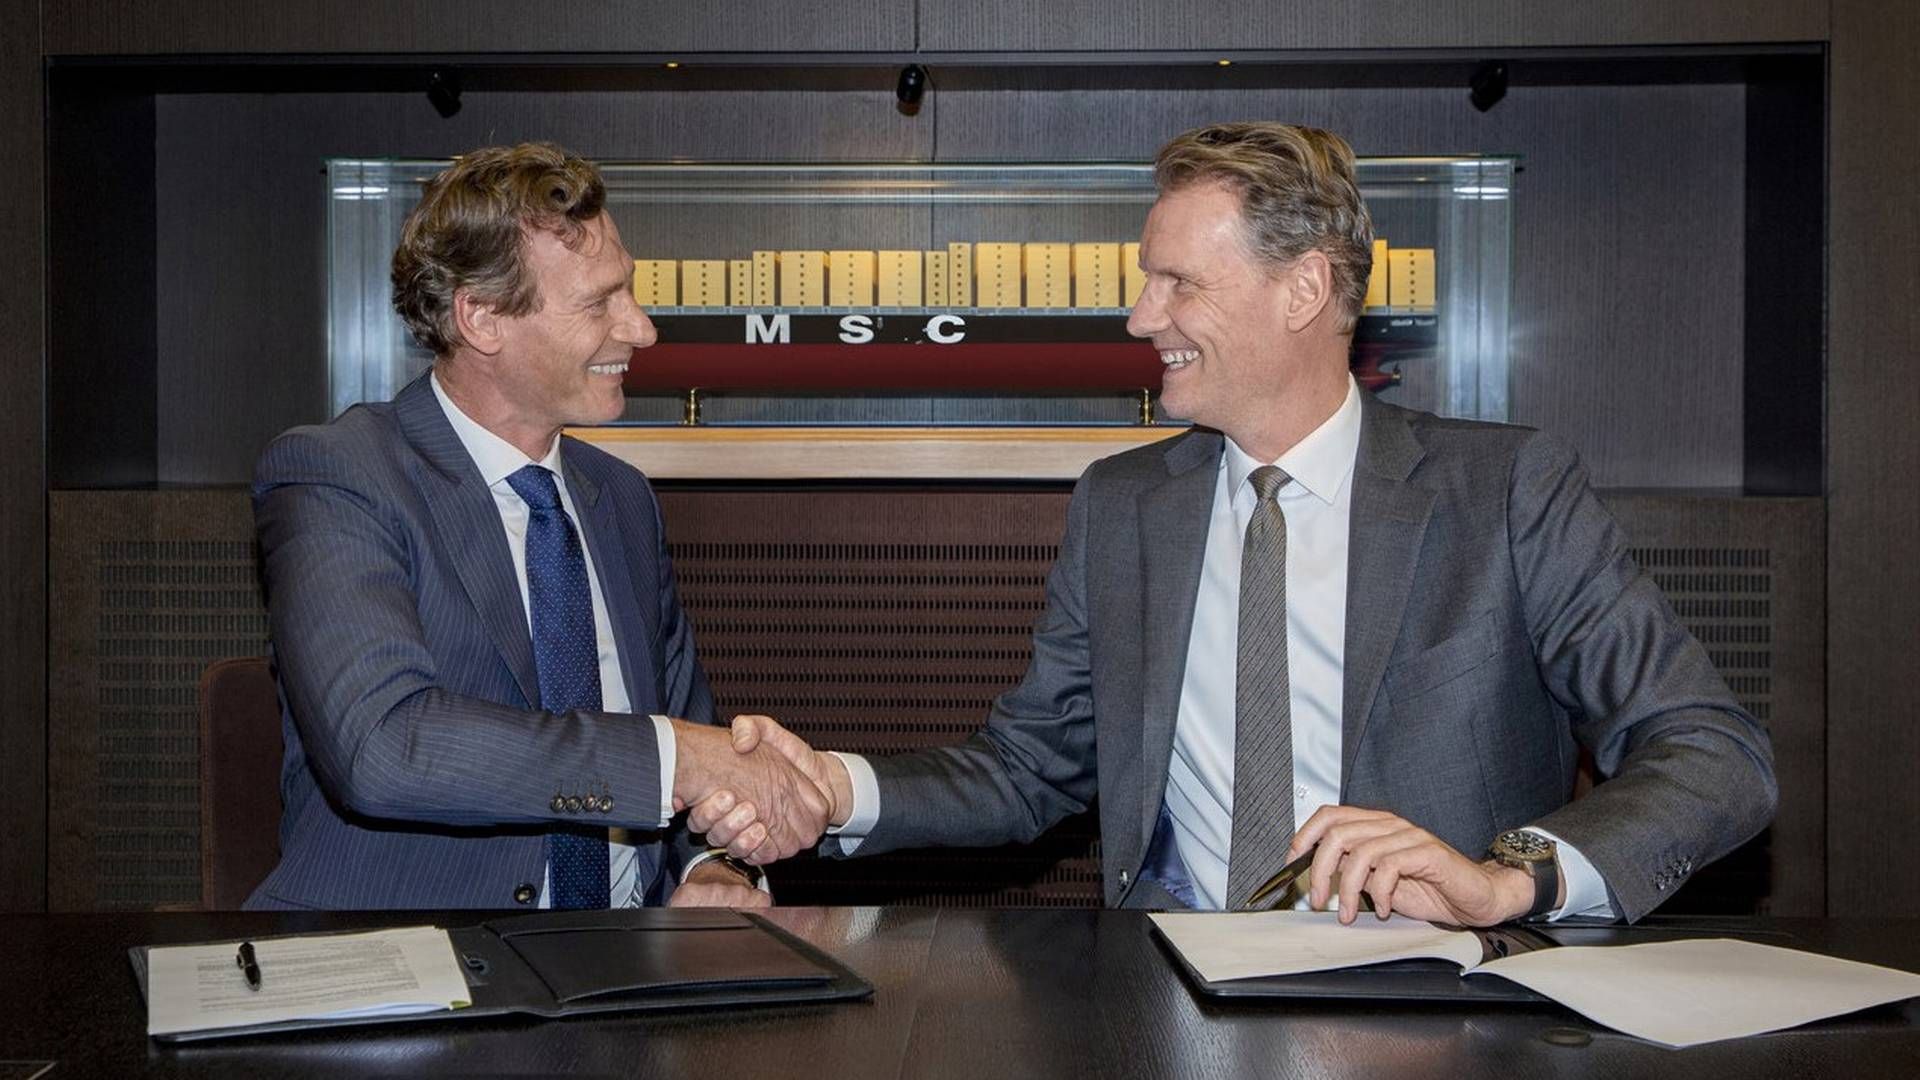 DB Schenker's global head of air and ocean freight, Thorsten Meincke, and MSC CEO Søren Toft signed a deal on biofuels earlier in the month at MSC headquarters in Geneva. | Photo: MSC, Oliver O'Hanlon.